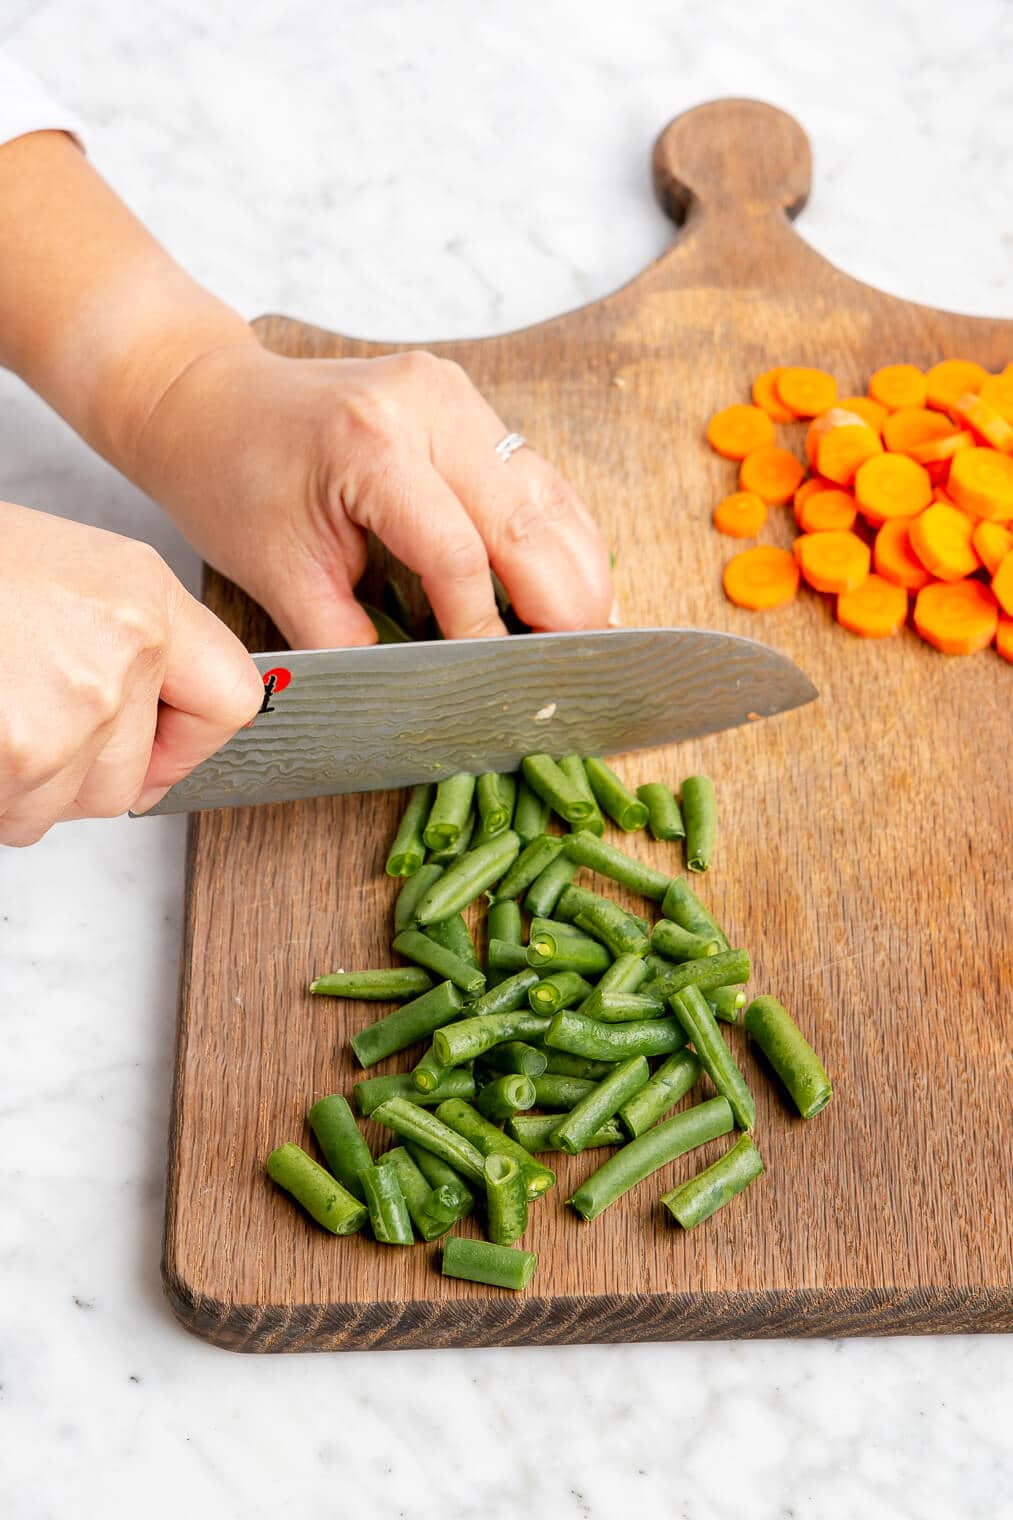 Hand holding a butcher knife to cut green beans. There are sliced carrots in the background on a wooden cutting board.